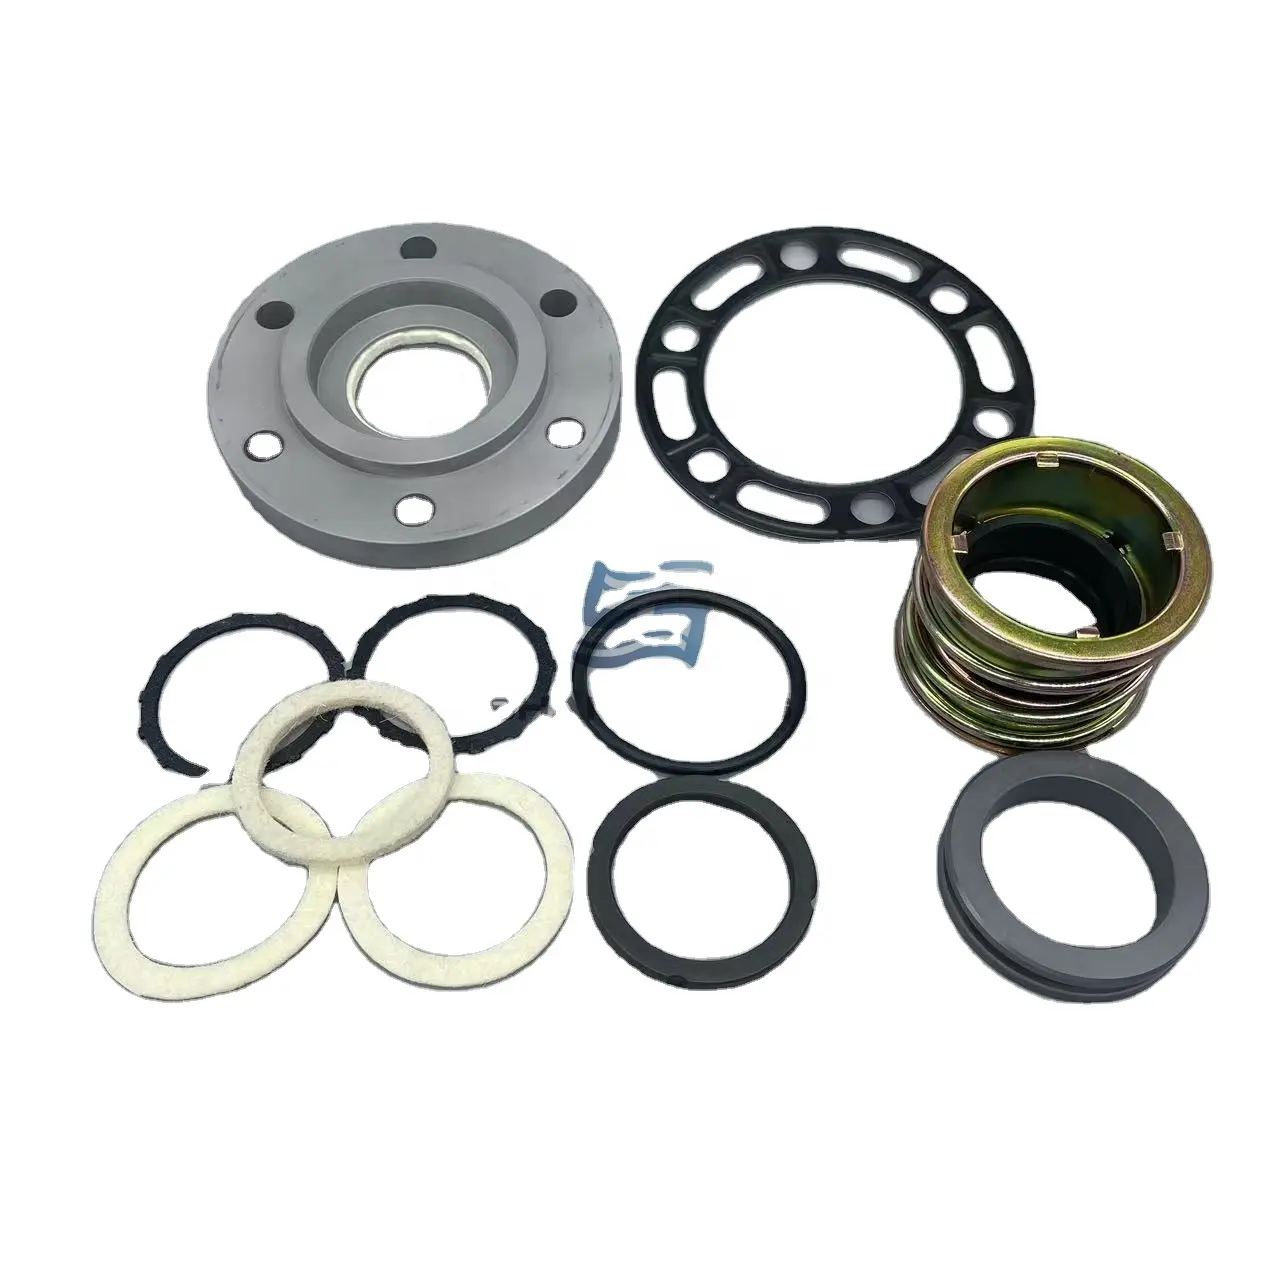 SH Auto Replacement Compressor Shaft Seal Parts 17-57027-00 05G Shaft Seal For Carrier Transicold For Thermo King